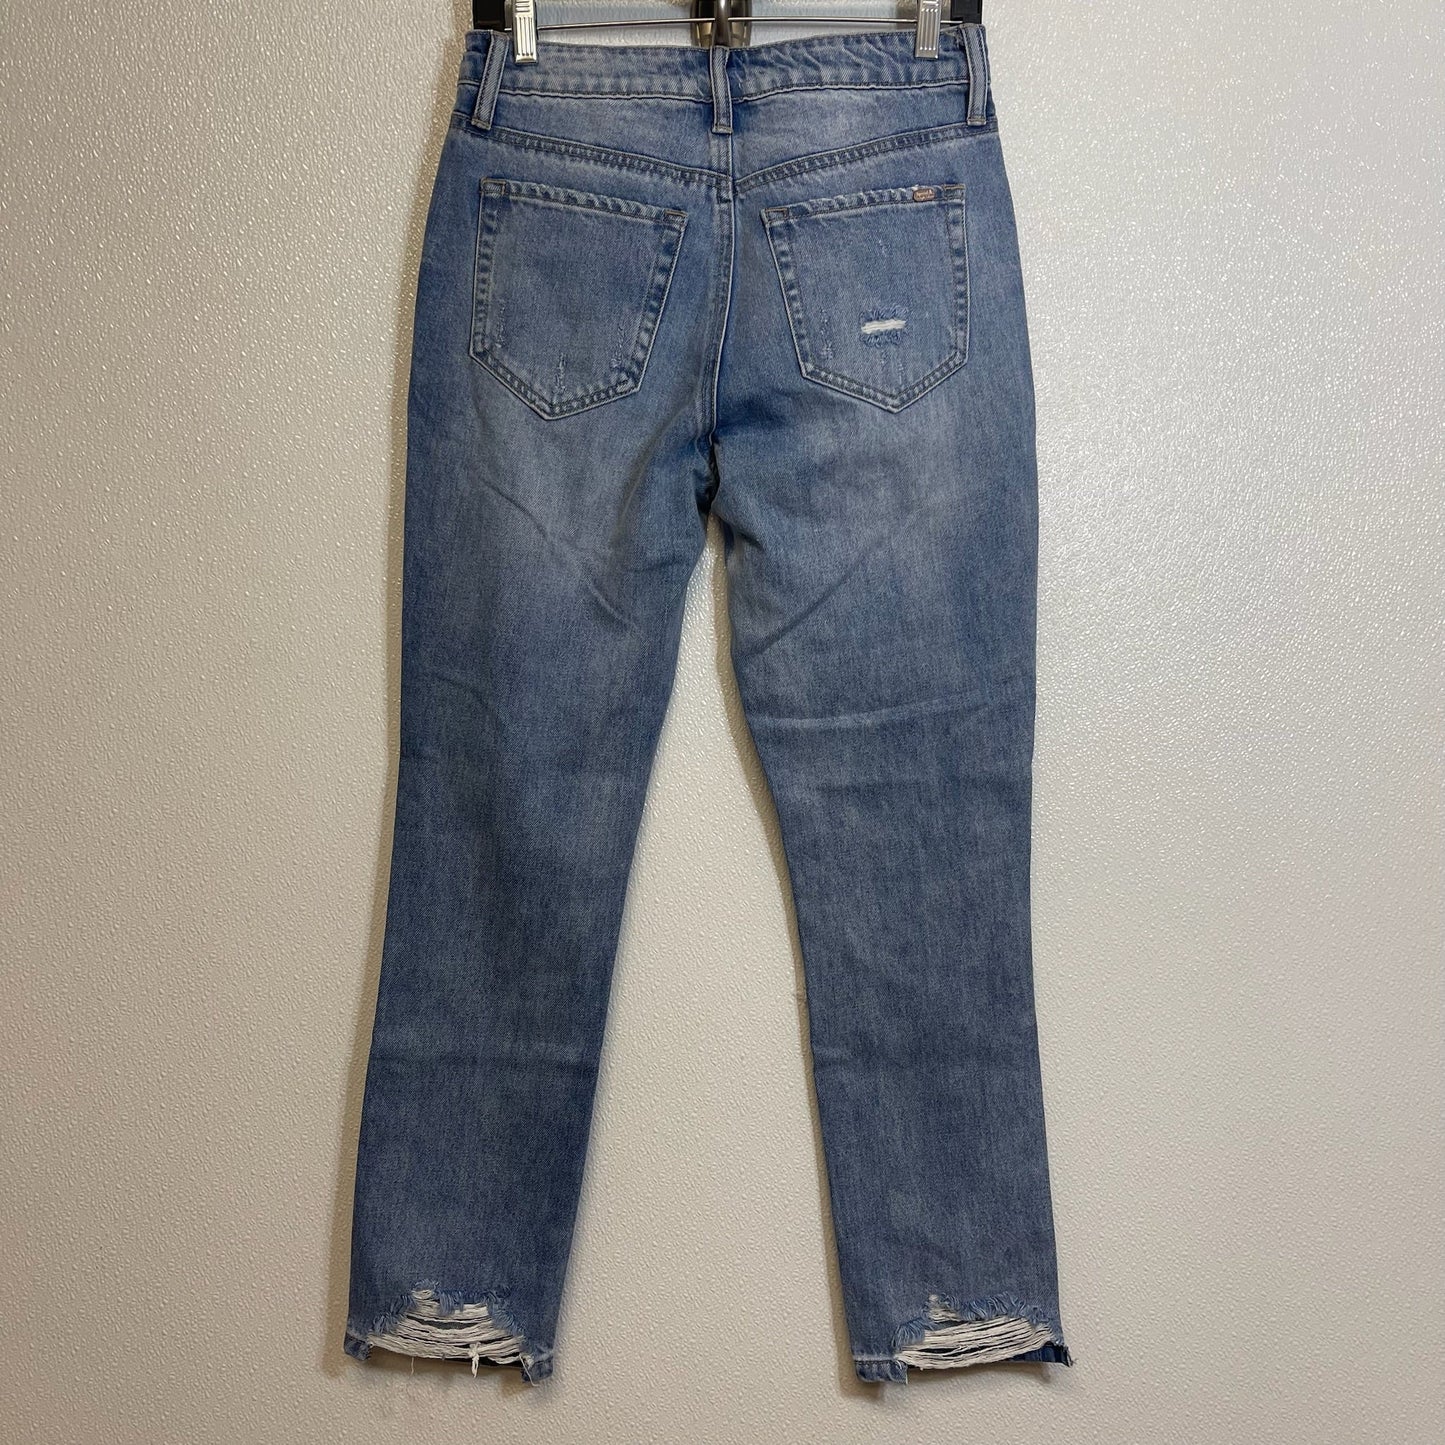 Jeans Relaxed/boyfriend Special A, Size 1